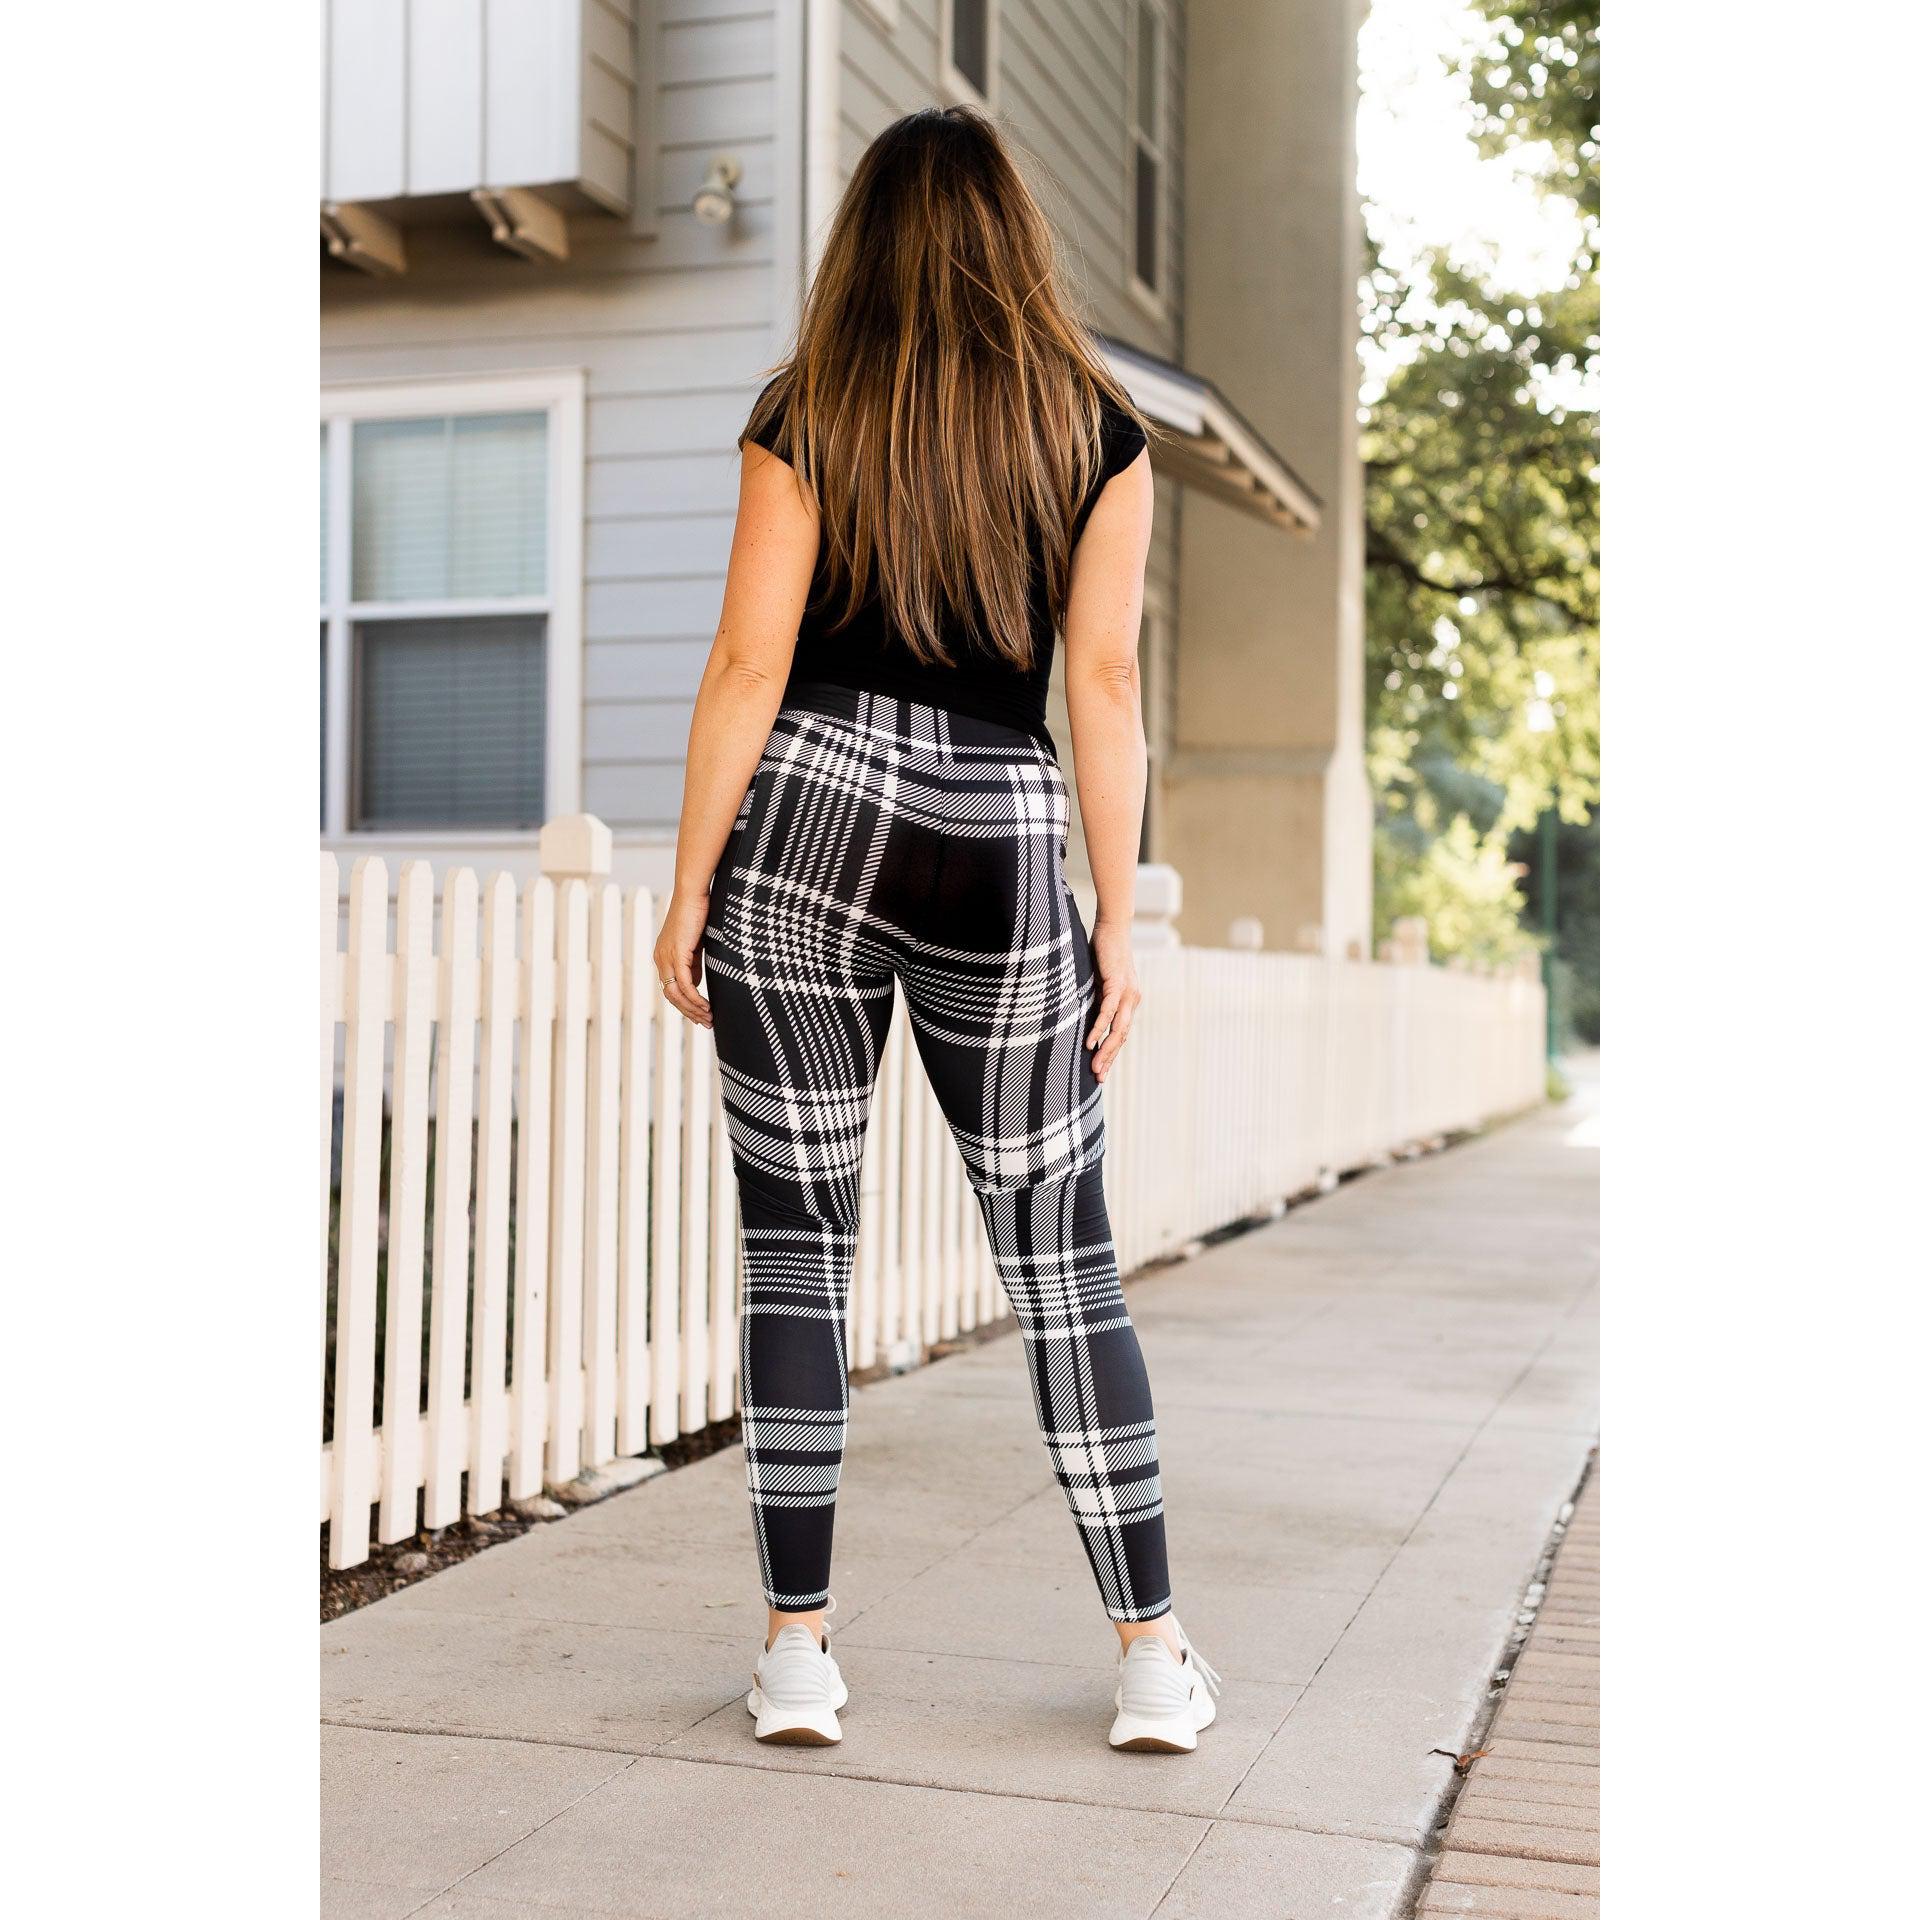 3 Easy and Cozy Leggings Outfit Ideas to Wear